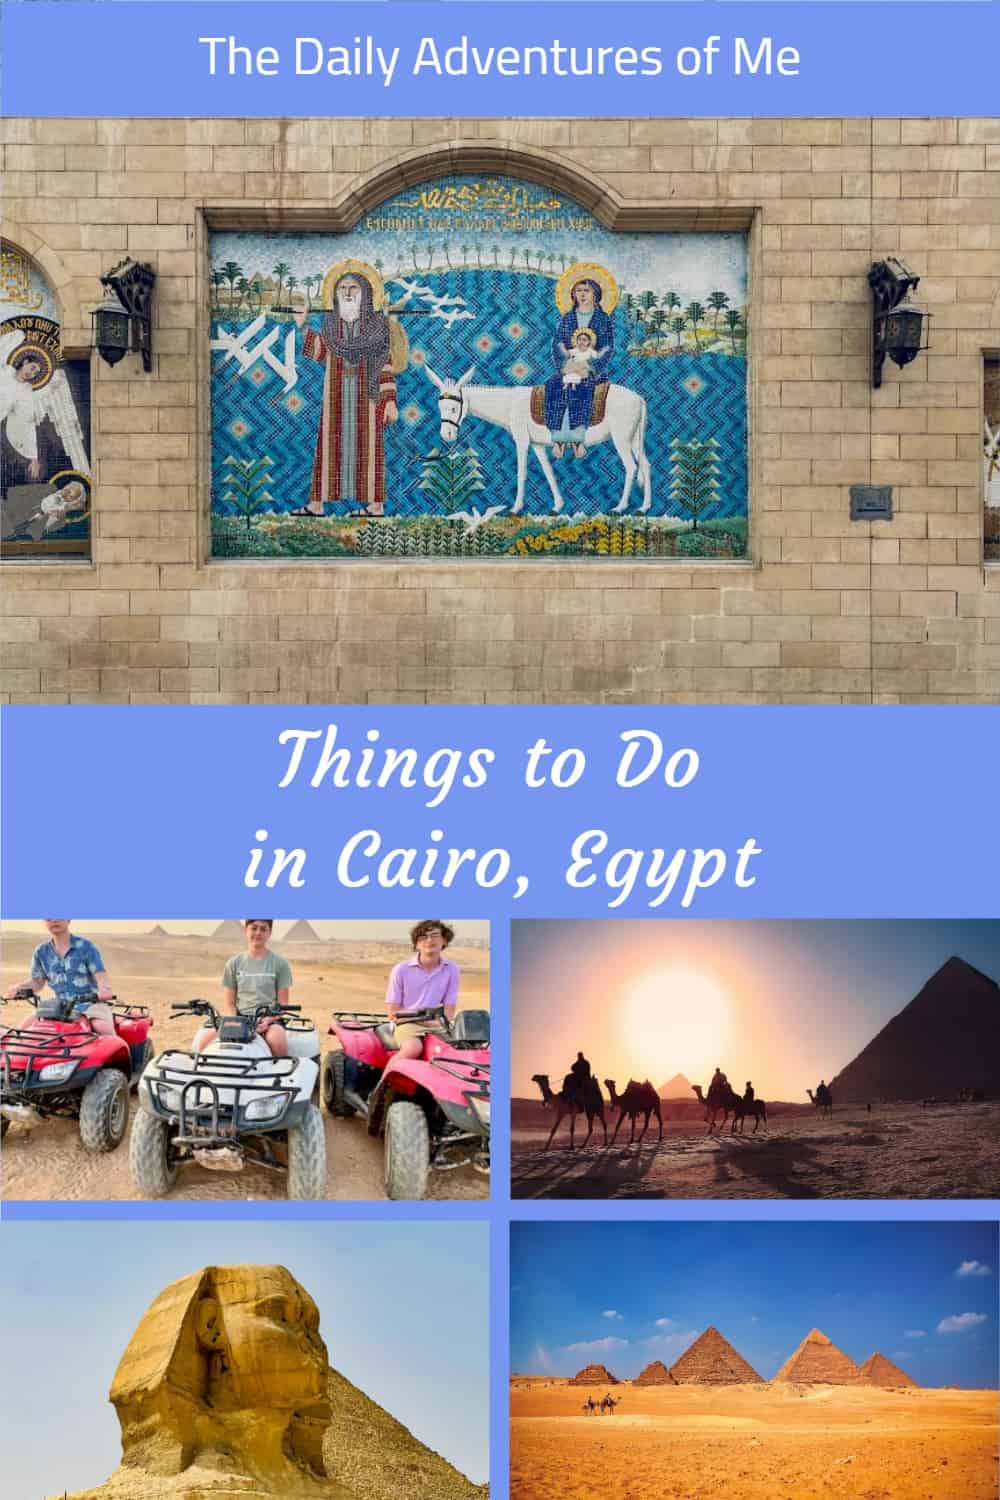 Find out why Cairo, Egypt is the perfect spot for your next family vacation or plan your Cairo trip now! #pyramids #ancienthistory #worldwonders #VisitCairo